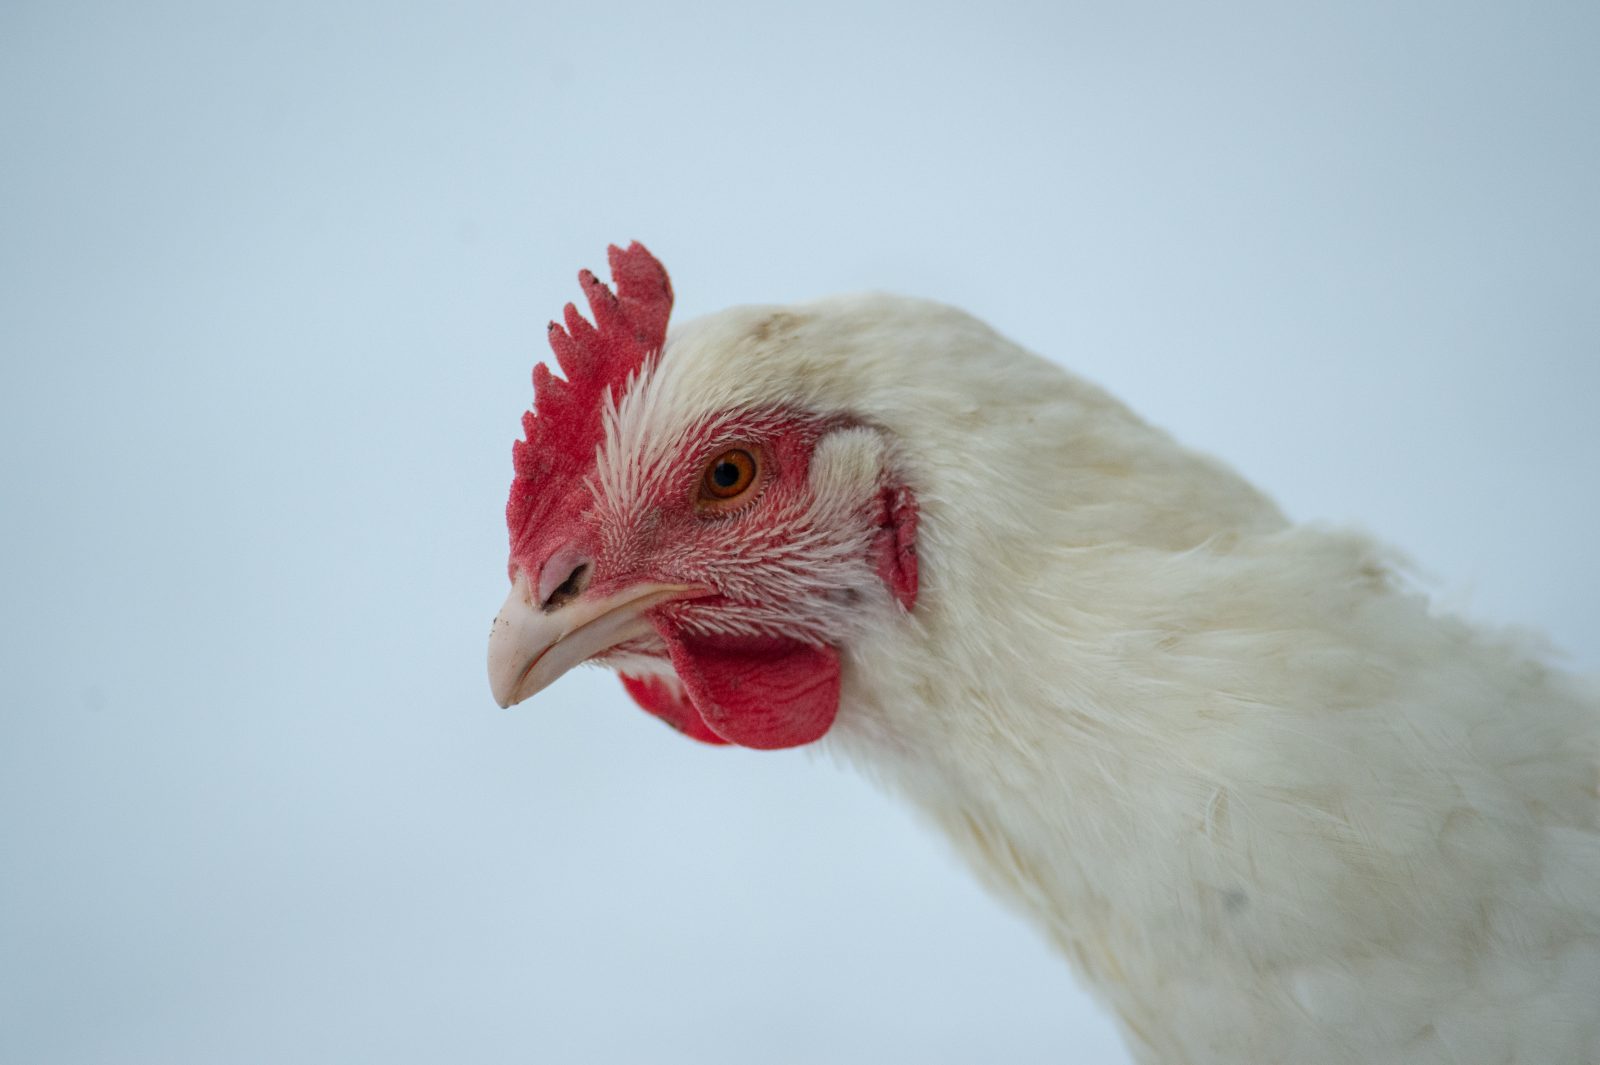 Misha hen with a snowy background